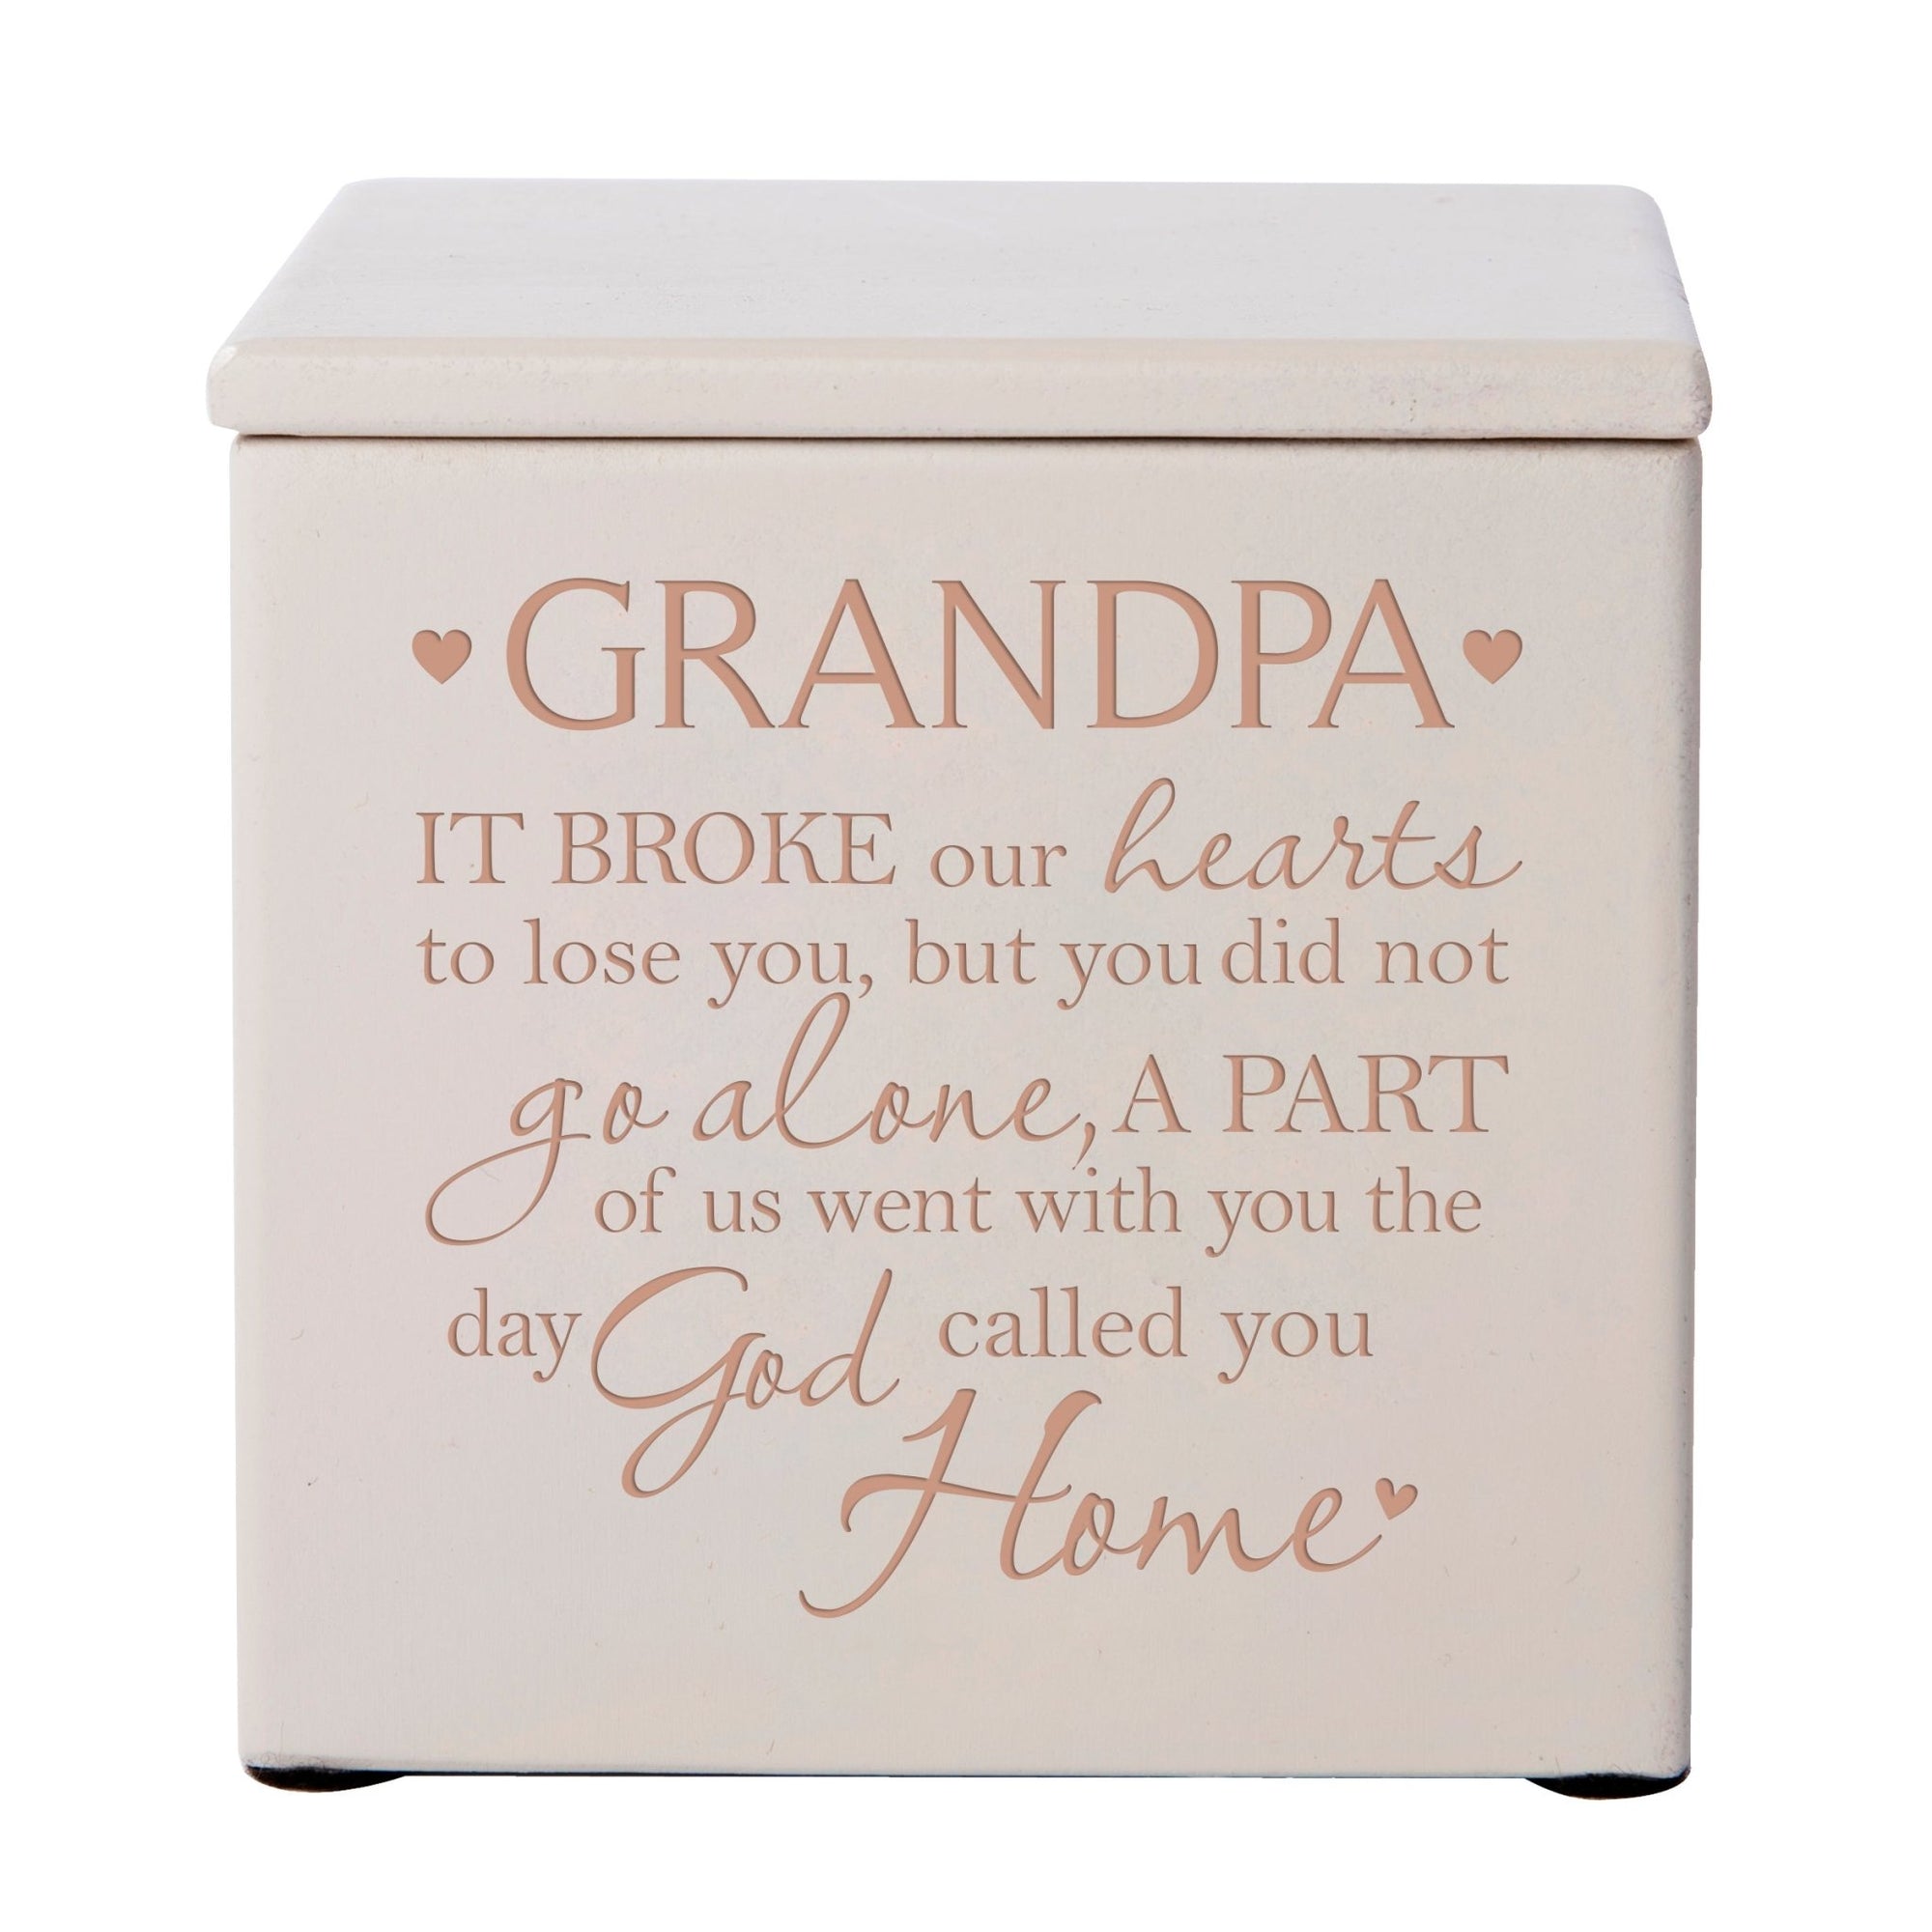 Modern Inspirational Memorial Wooden Cremation Urn Box 4.5x4.5in Holds 49 Cu Inches Of Human Ashes (It Broke Our Hearts Grandpa) Funeral and Commemorative Keepsake - LifeSong Milestones